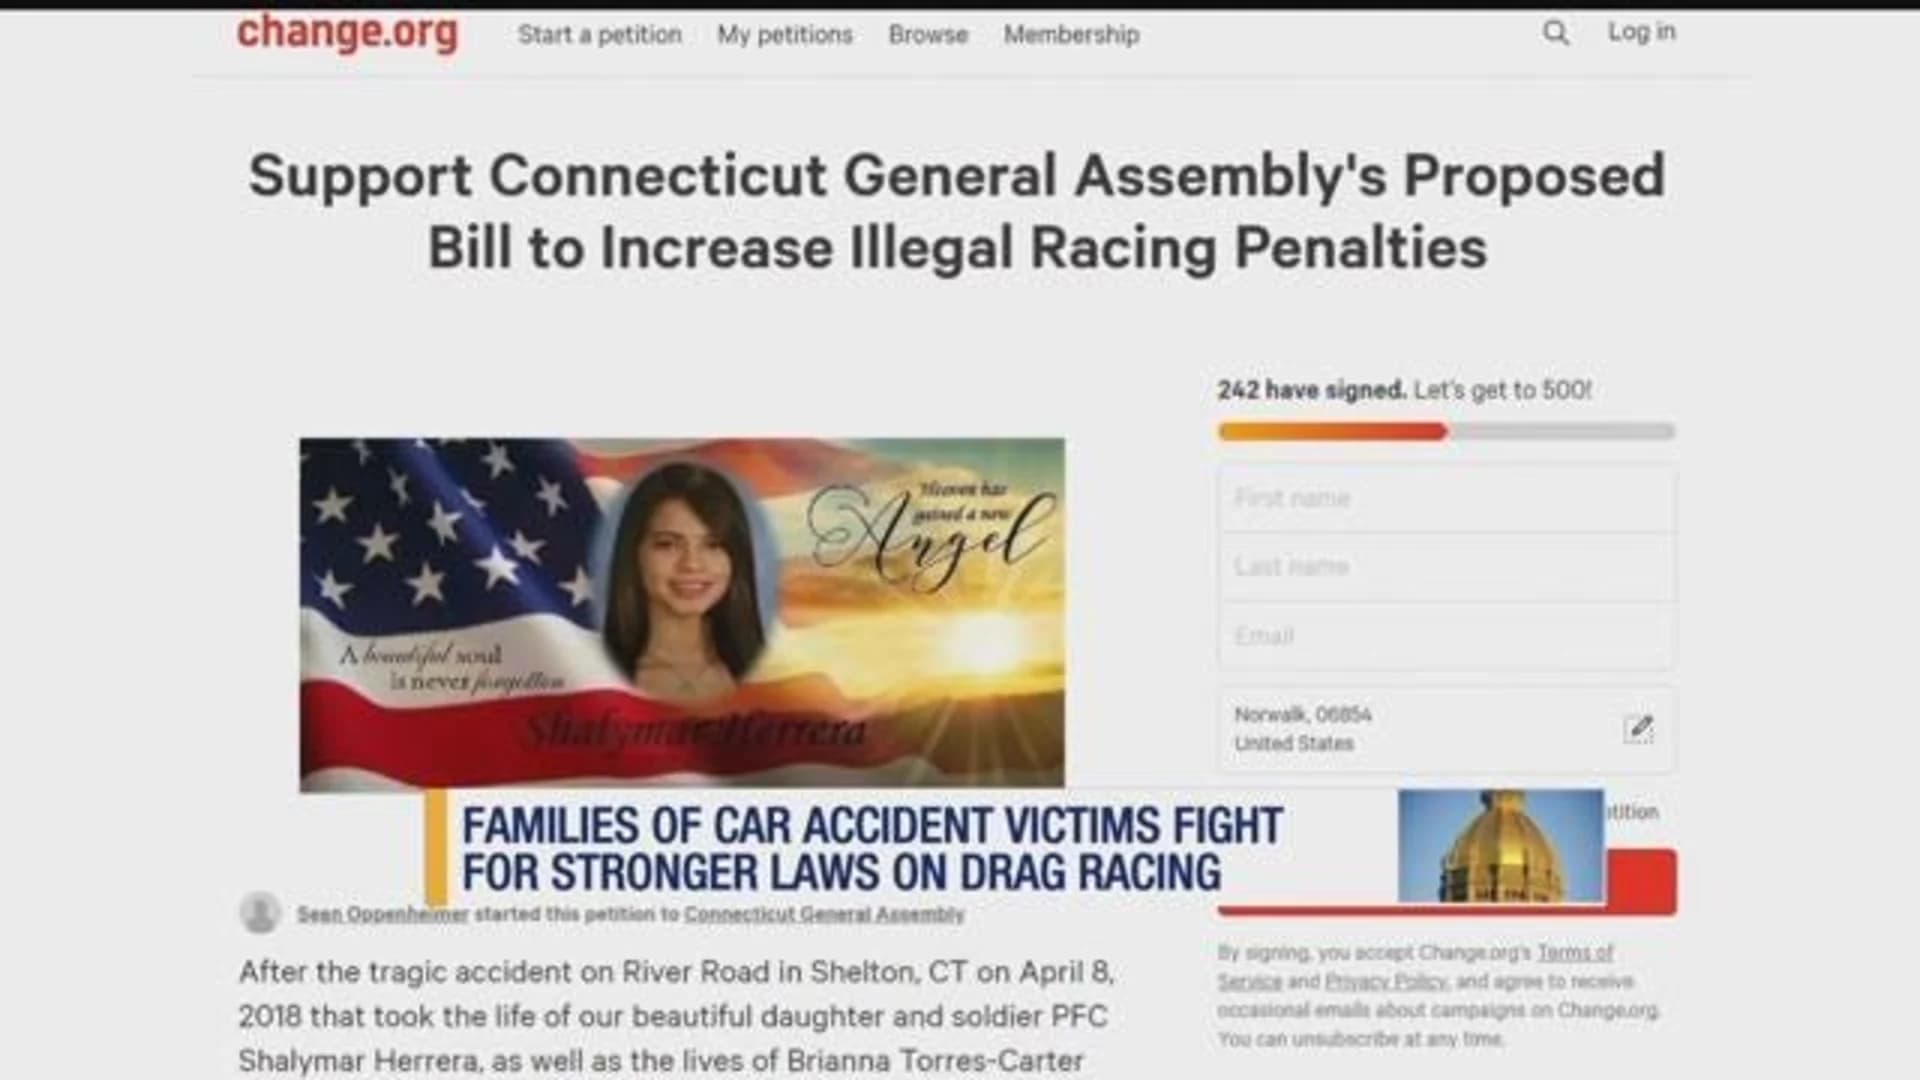 Victims' families take fight for stiffer drag racing laws to Hartford